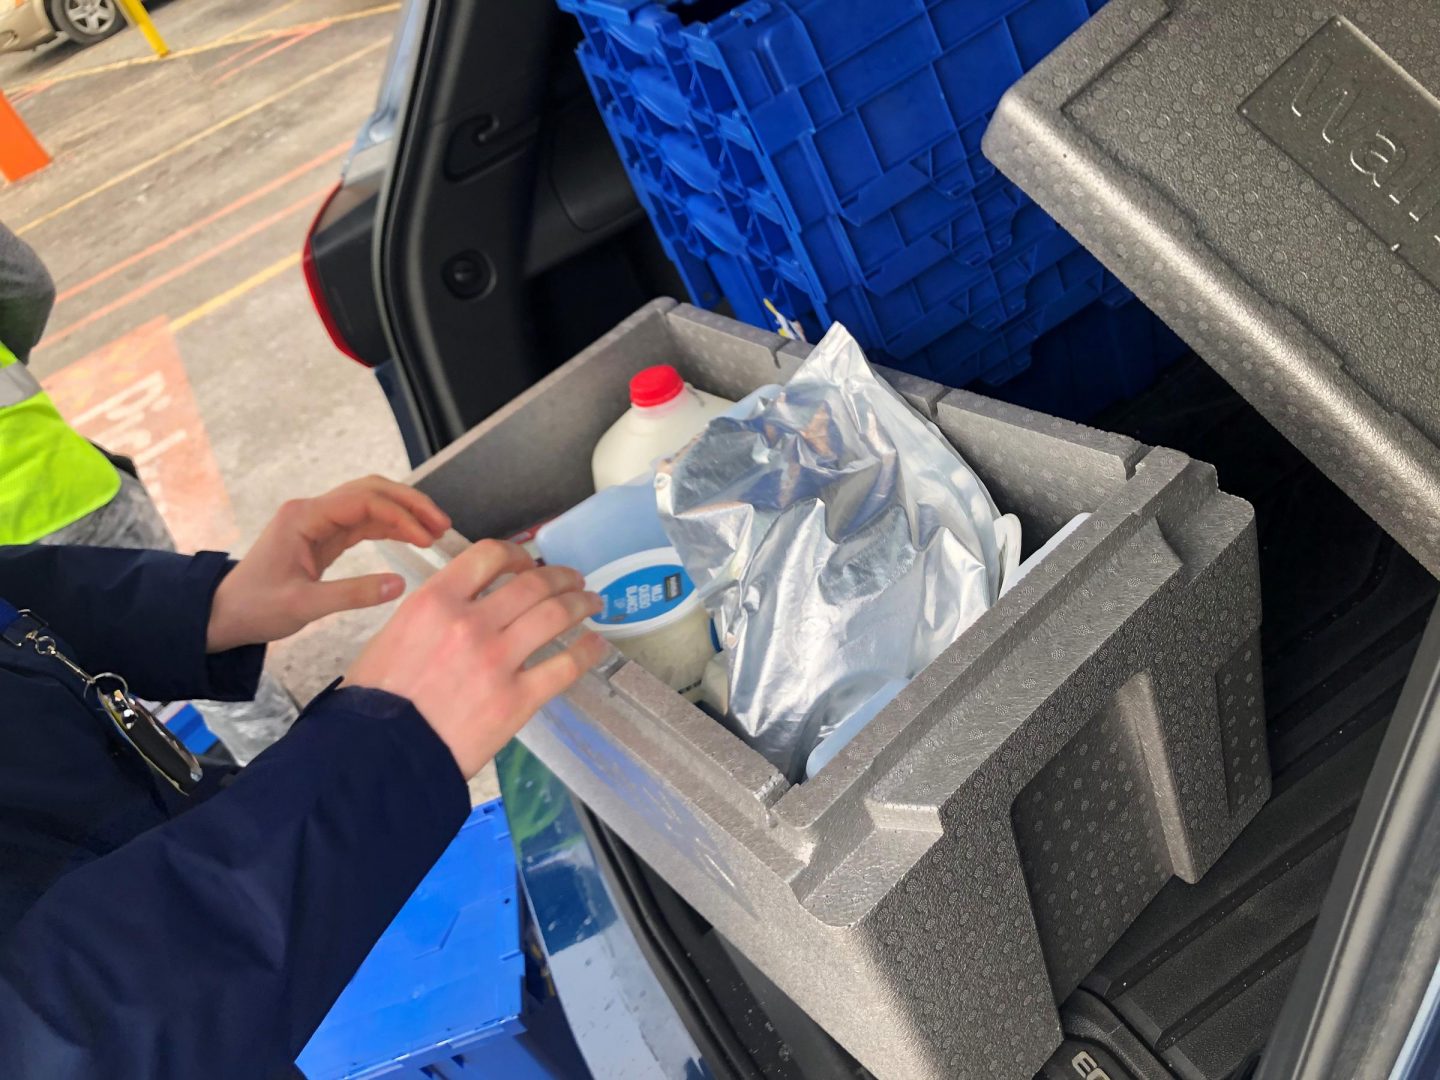 Walmart InHome Delivery associate Nick Burmaster loads groceries into the car he'll take to make deliveries on Thursday, January 24, 2020.